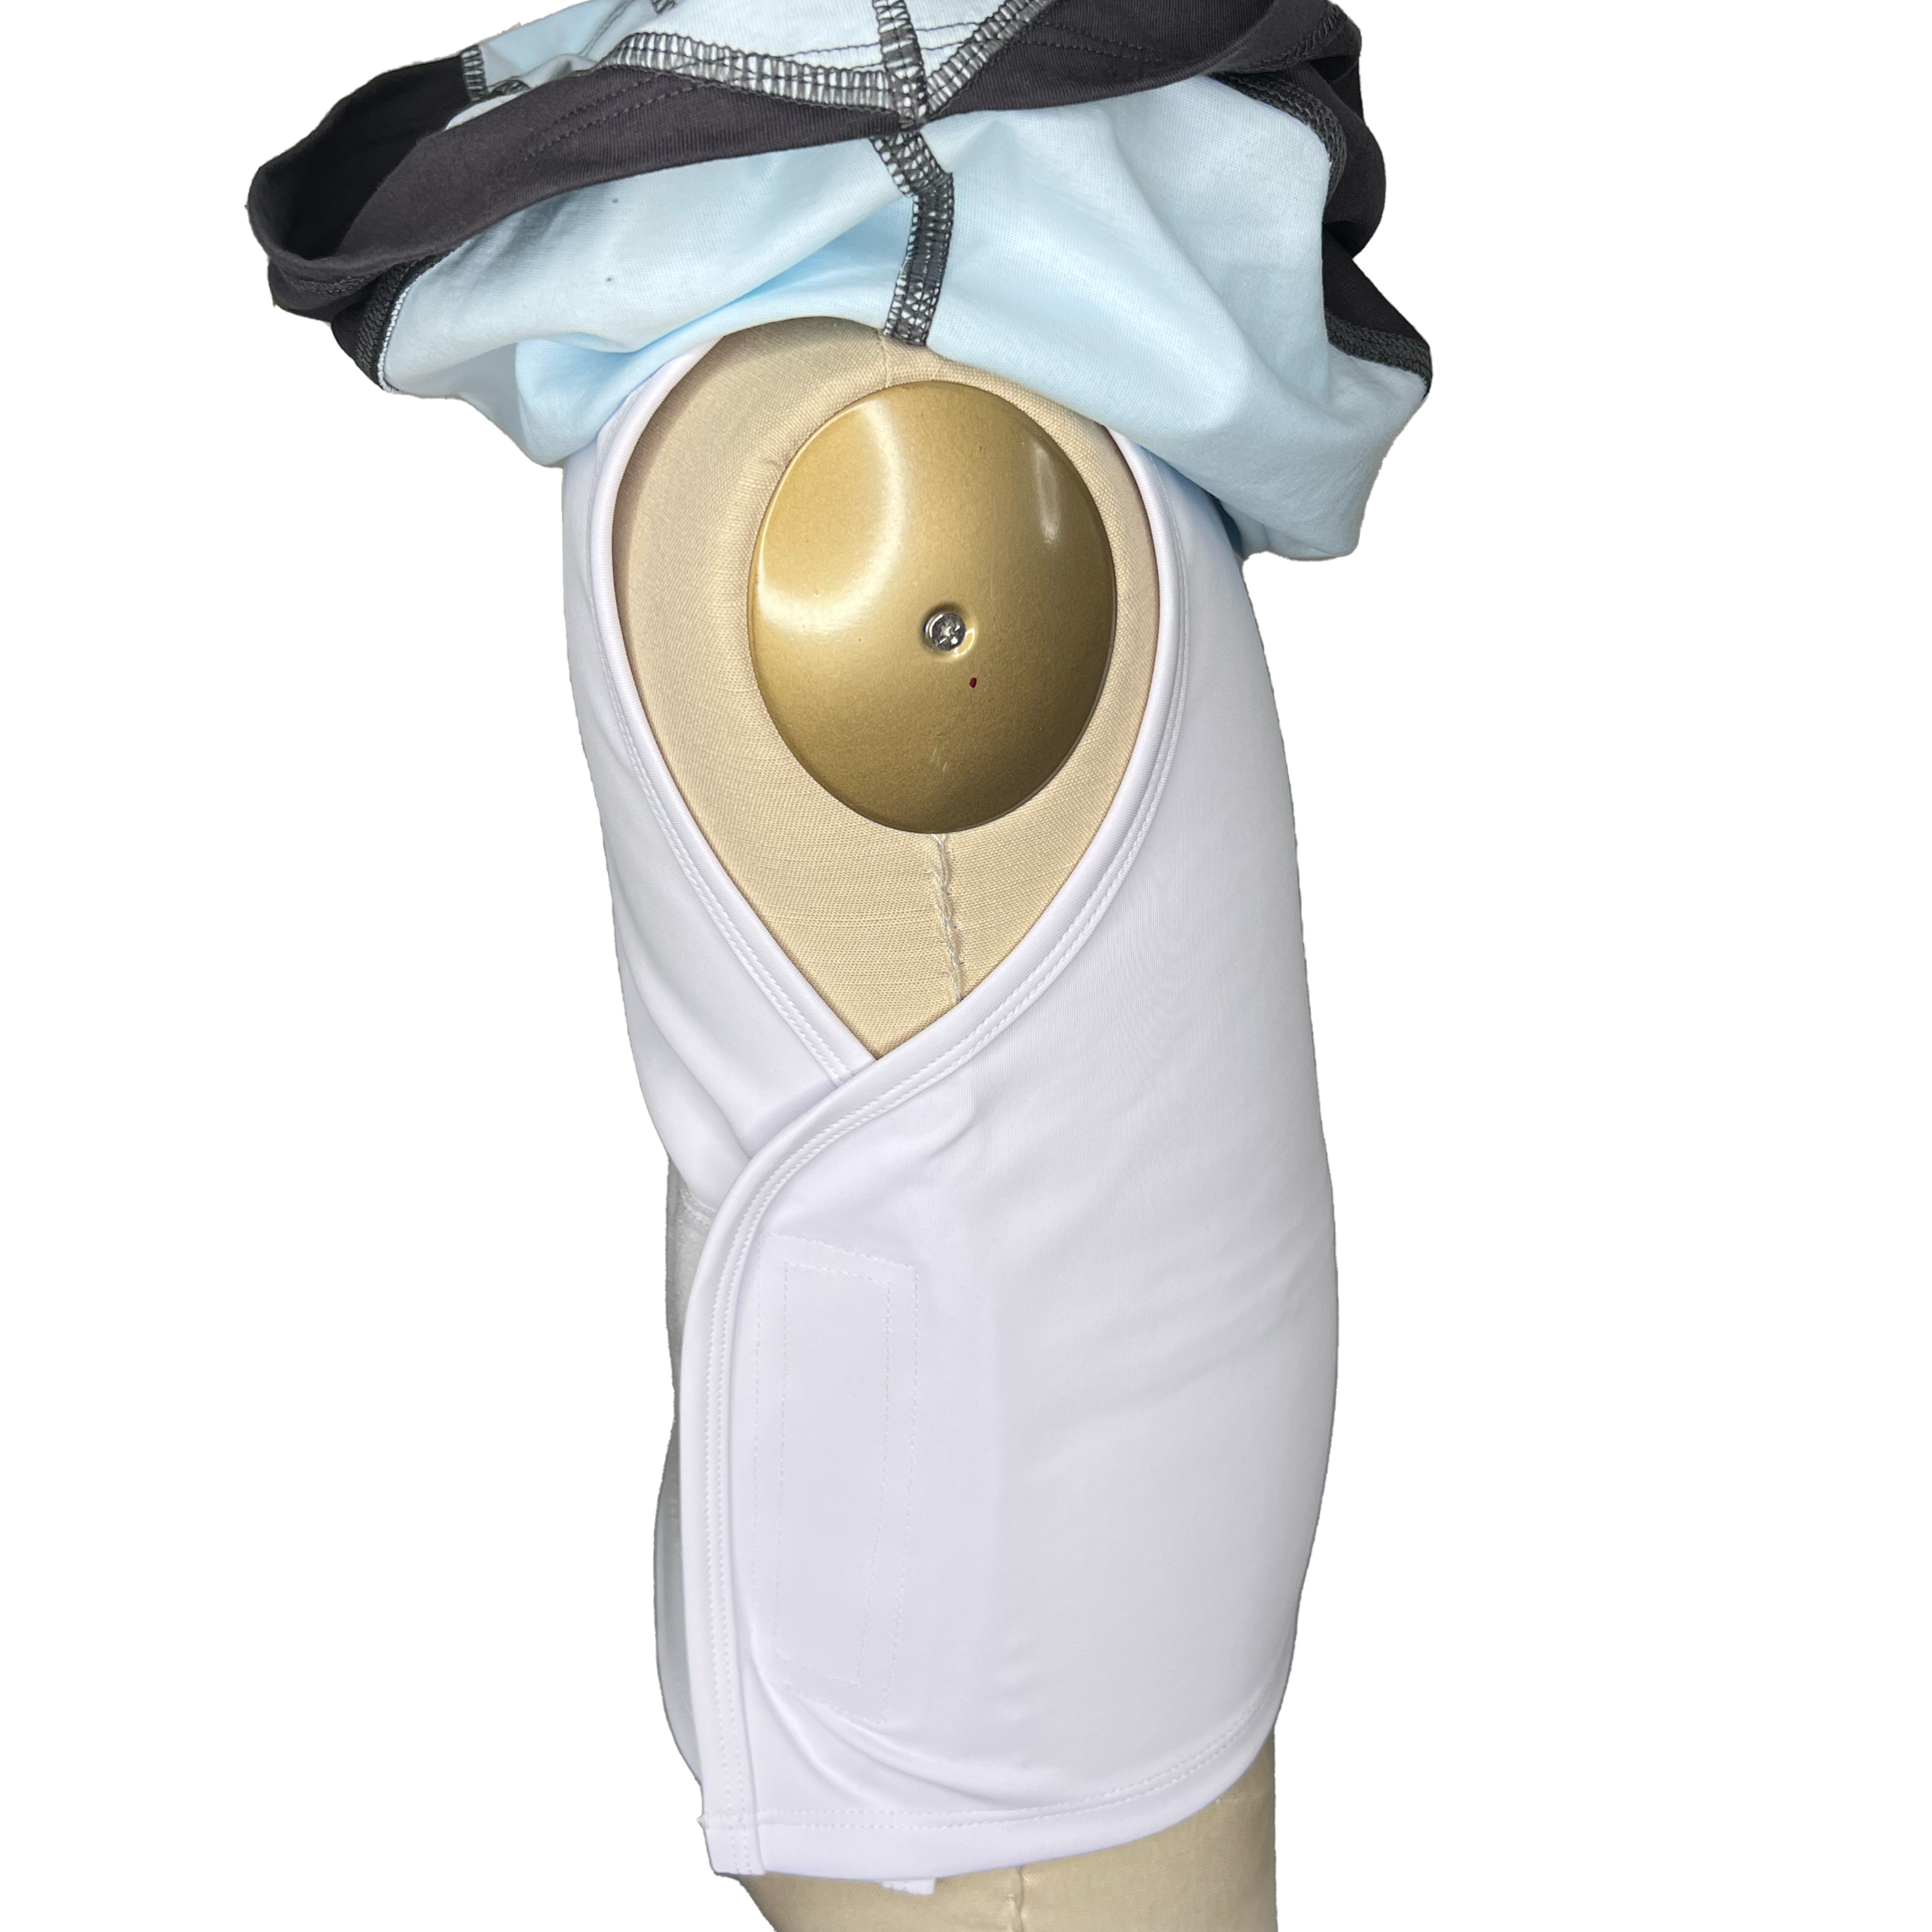 Side view of adjustable compression lining of sensory shirt